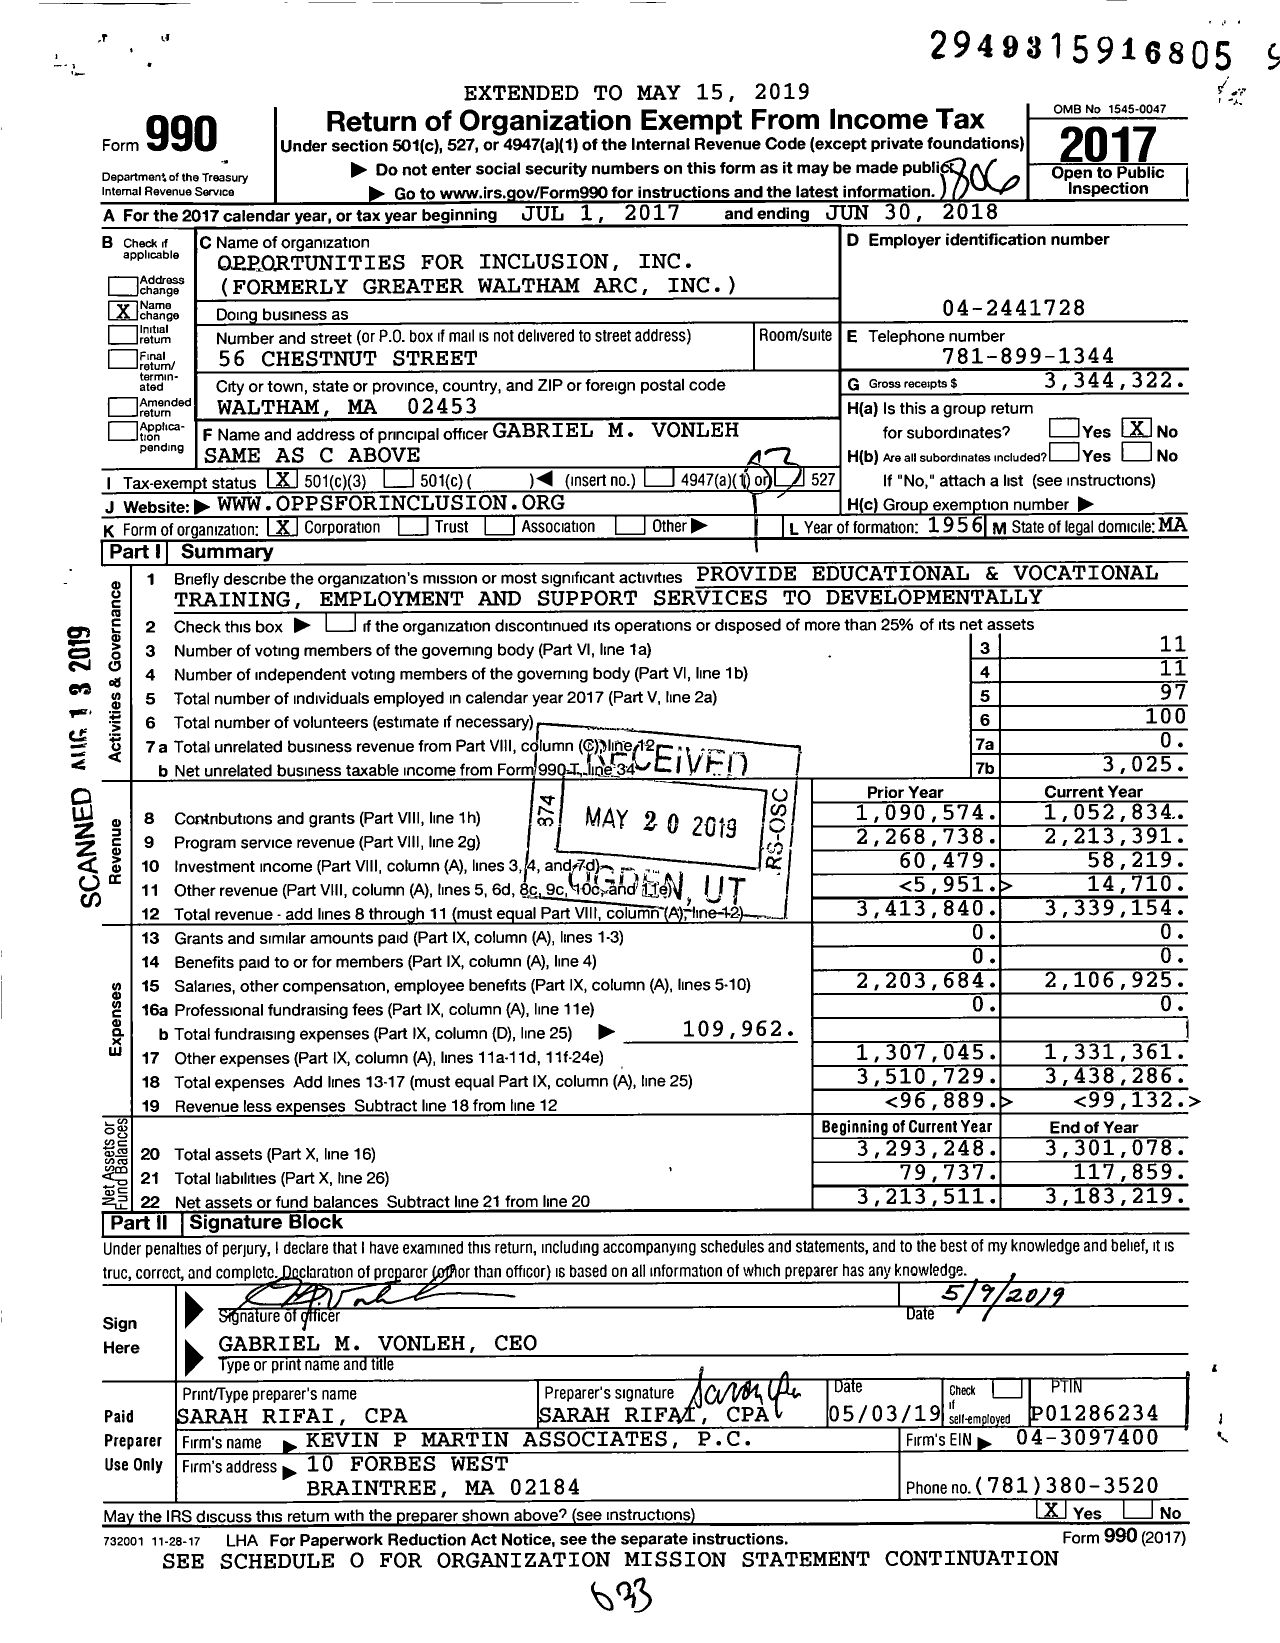 Image of first page of 2017 Form 990 for Opportunities for Inclusion